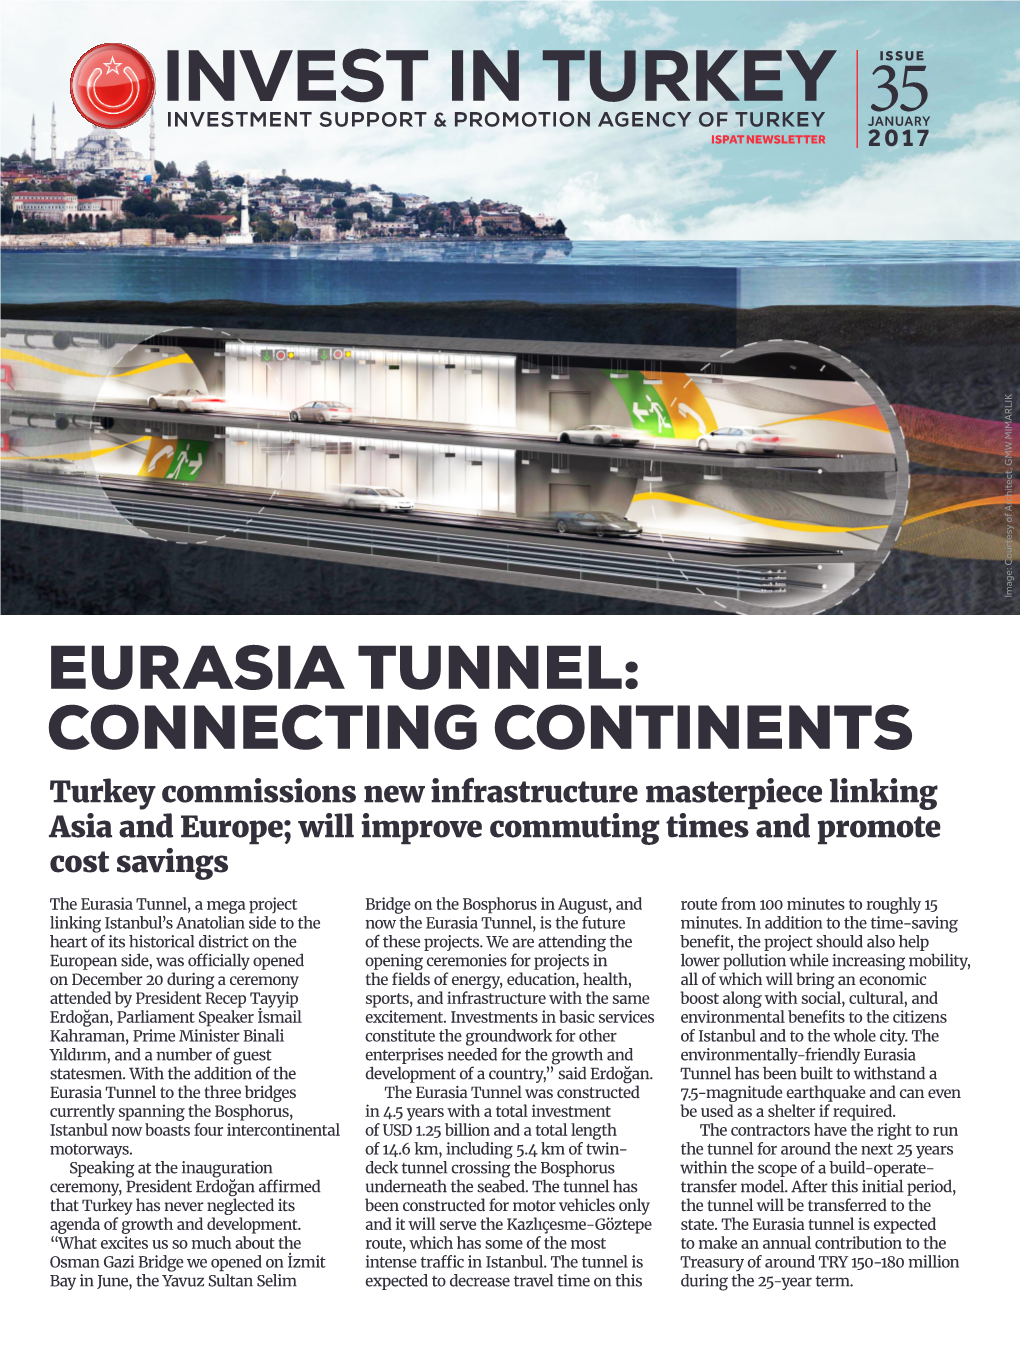 EURASIA TUNNEL: CONNECTING CONTINENTS Turkey Commissions New Infrastructure Masterpiece Linking Asia and Europe; Will Improve Commuting Times and Promote Cost Savings